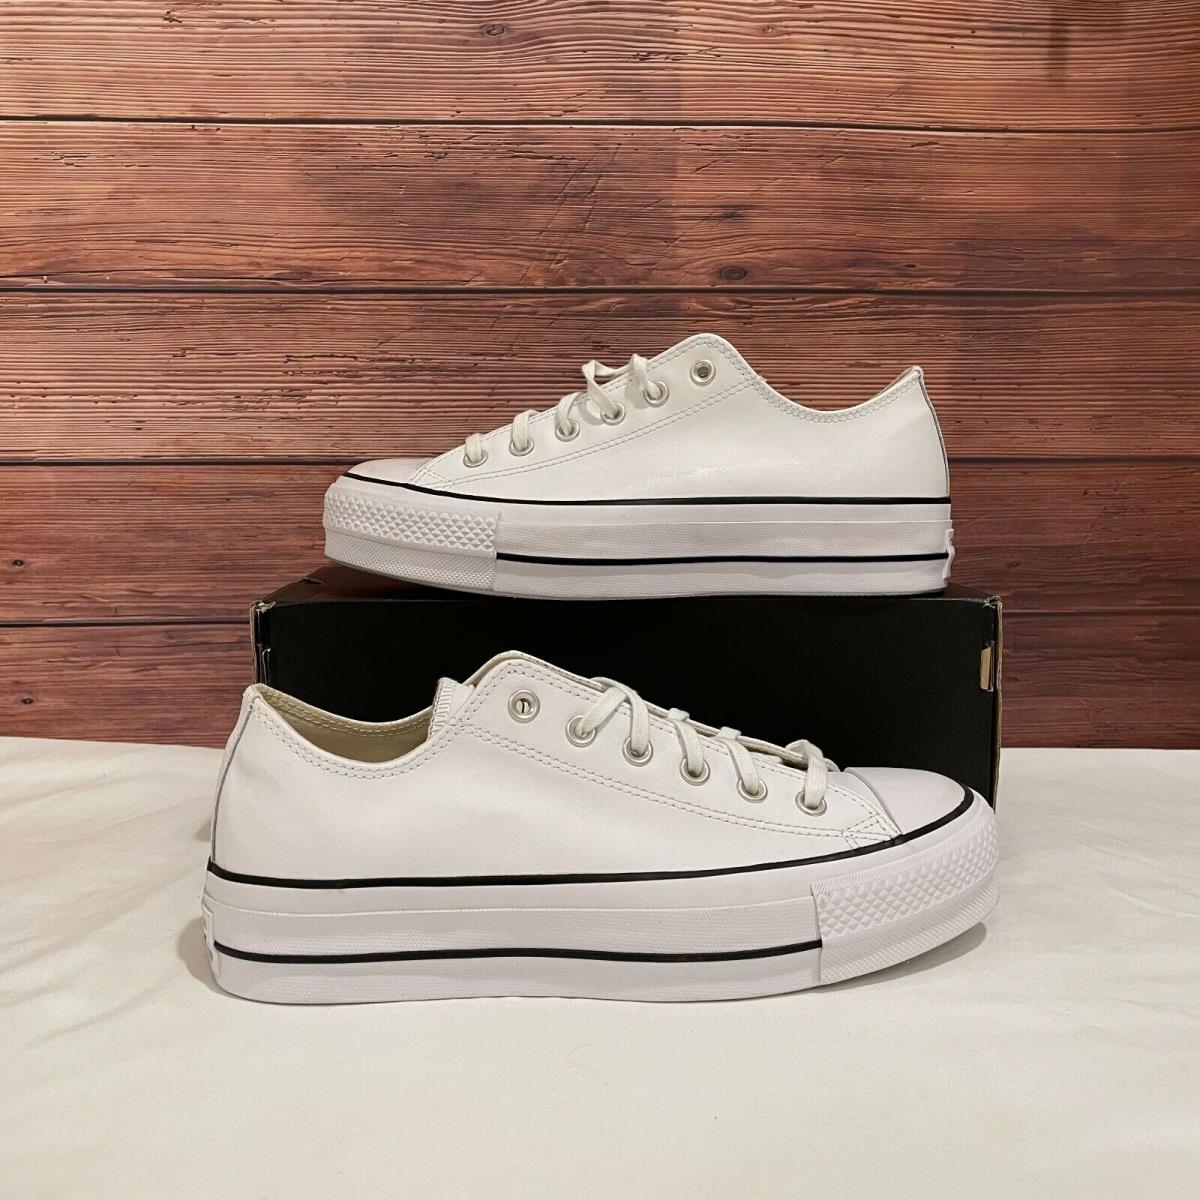 Converse Chuck Taylor All Star Platform White Leather Low Women`s Shoes 561680C